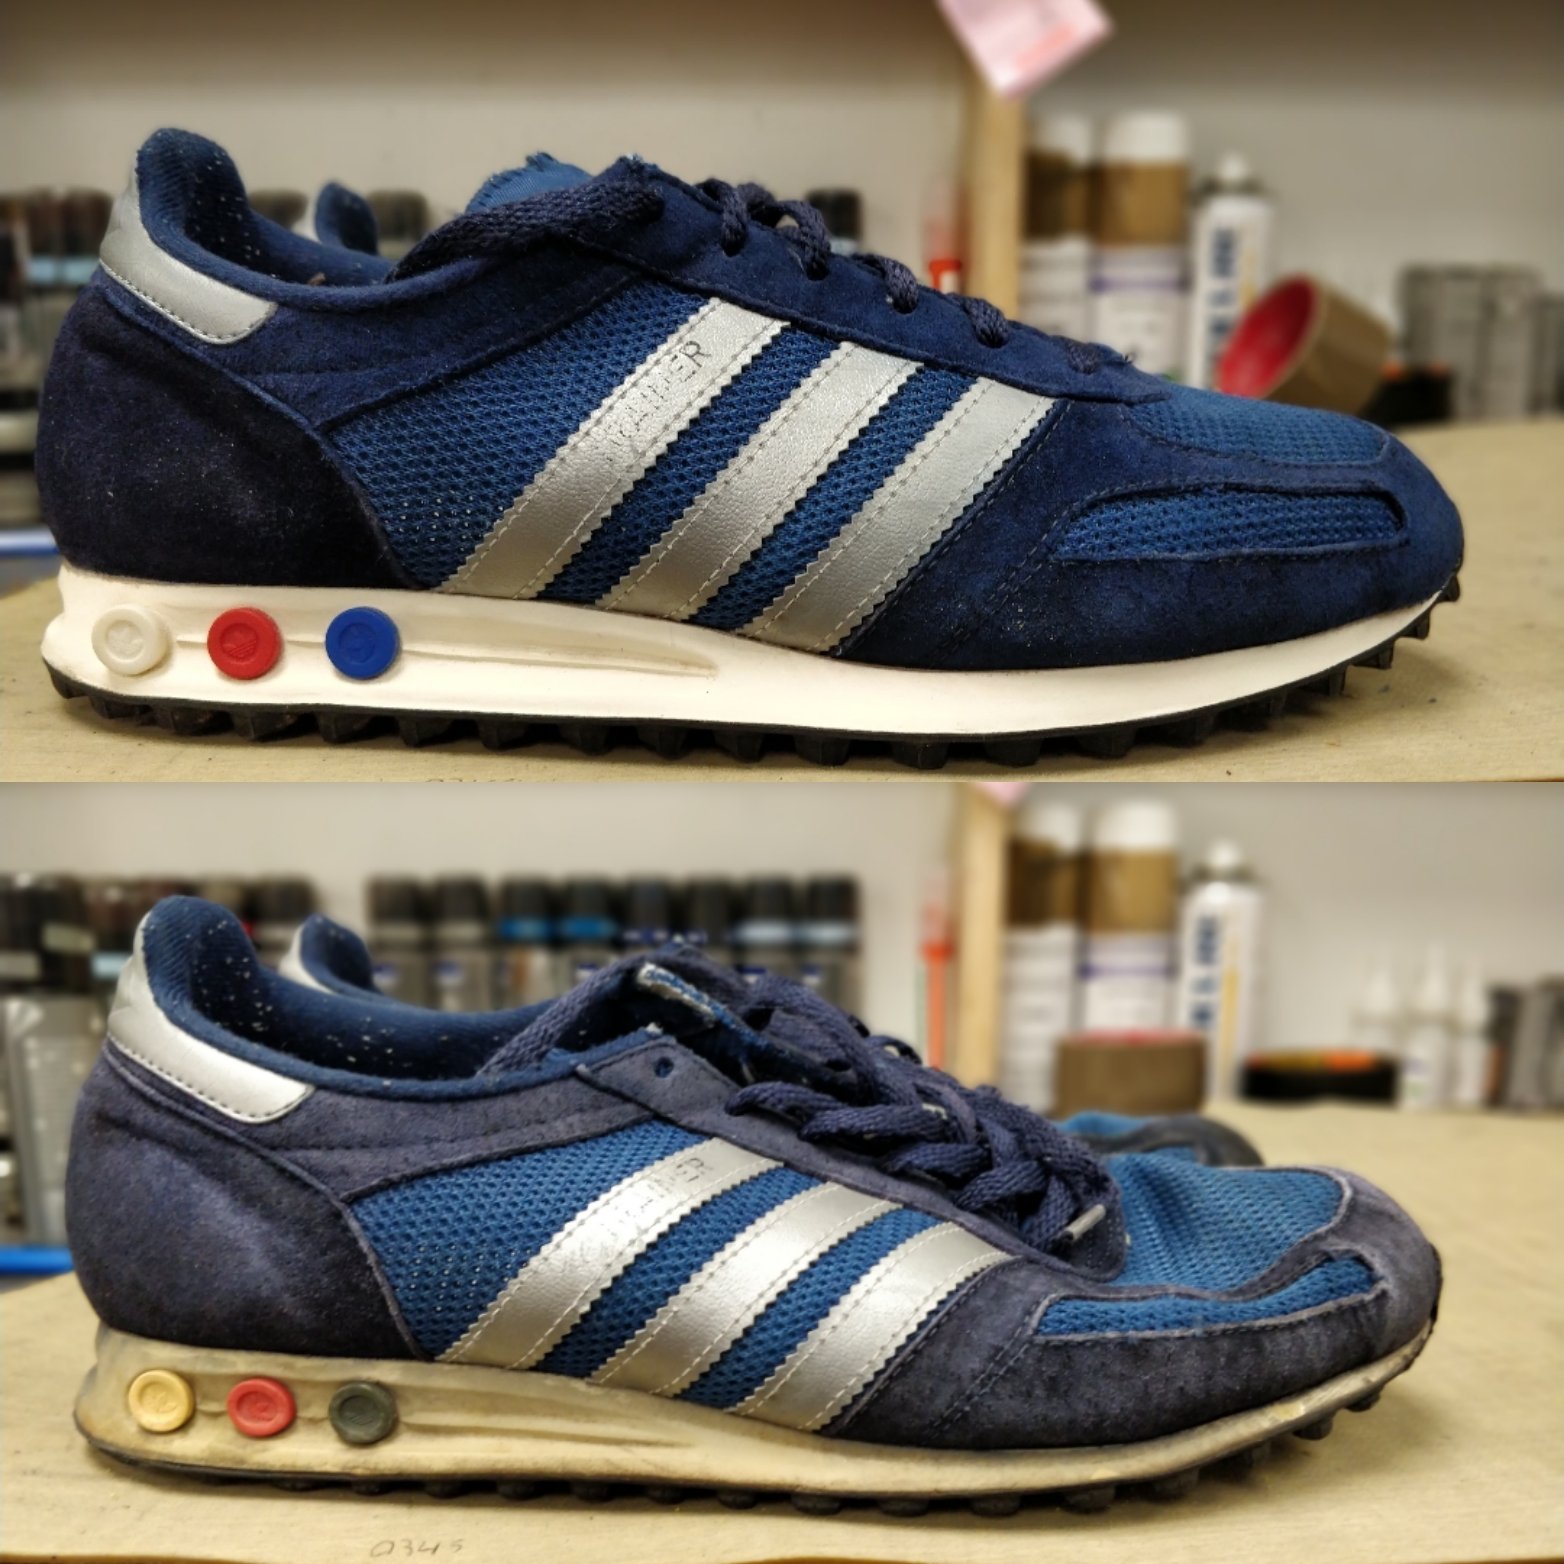 beskyldninger foretrækkes Overgivelse Vintage Trainer Repairs on Twitter: "adidas LA Trainer sole transplant,  deep clean / refresh. #adidas #adidasoriginals #trainers #casualstyle  #casuals #terracefashion https://t.co/vQEyfLurCF" / Twitter